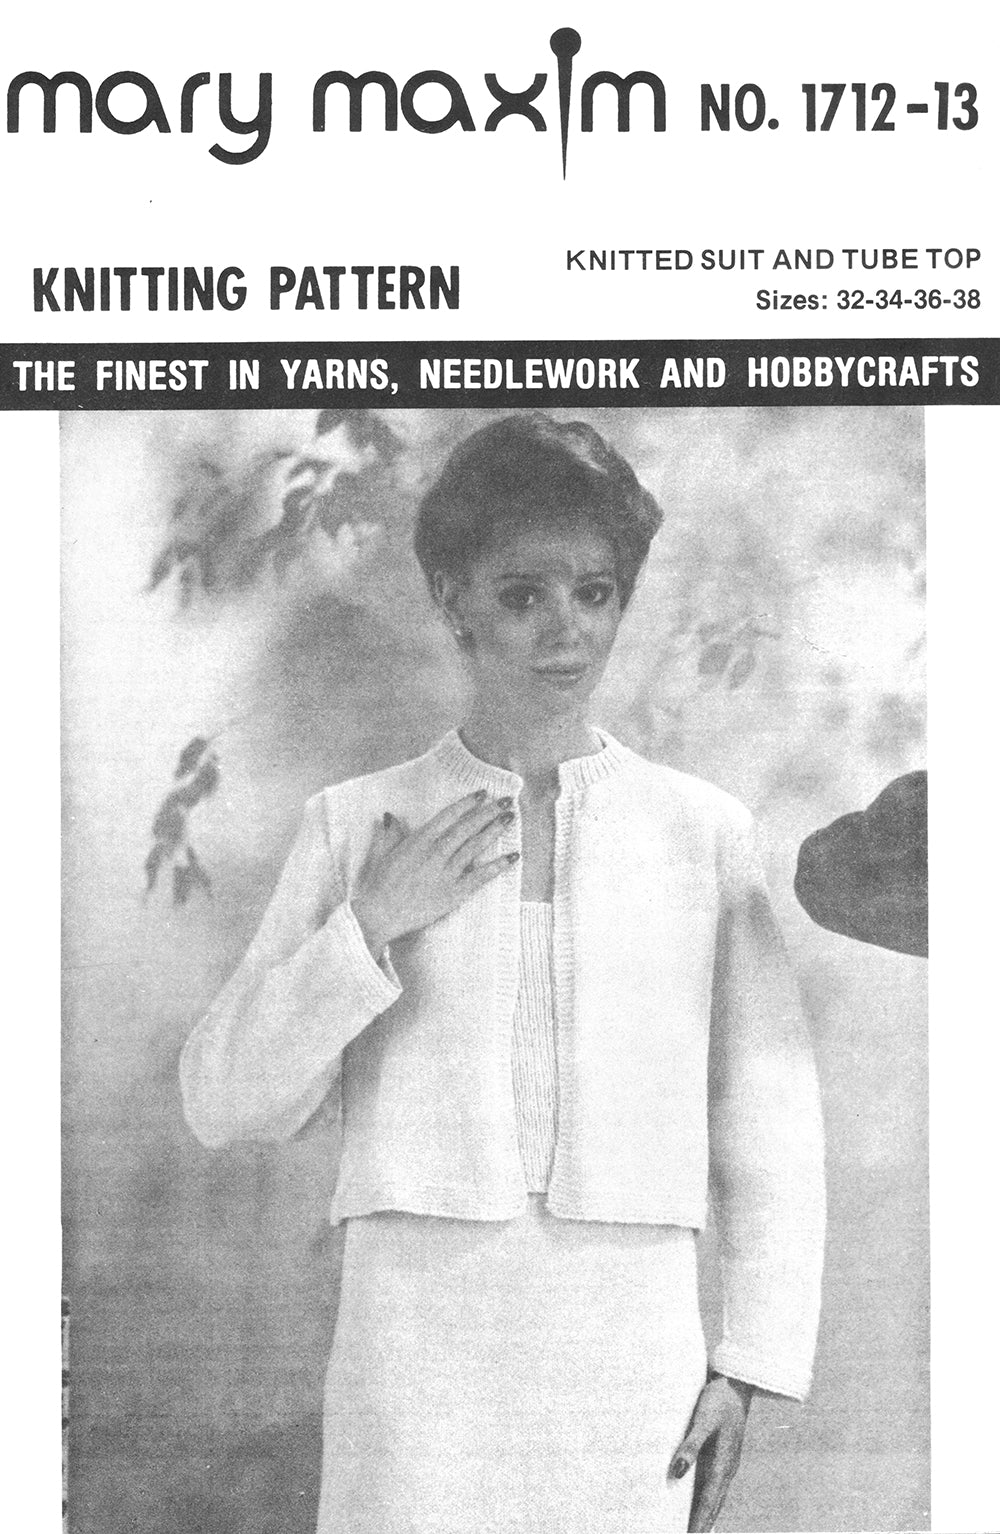 Knitted Suit and Tube Top Pattern